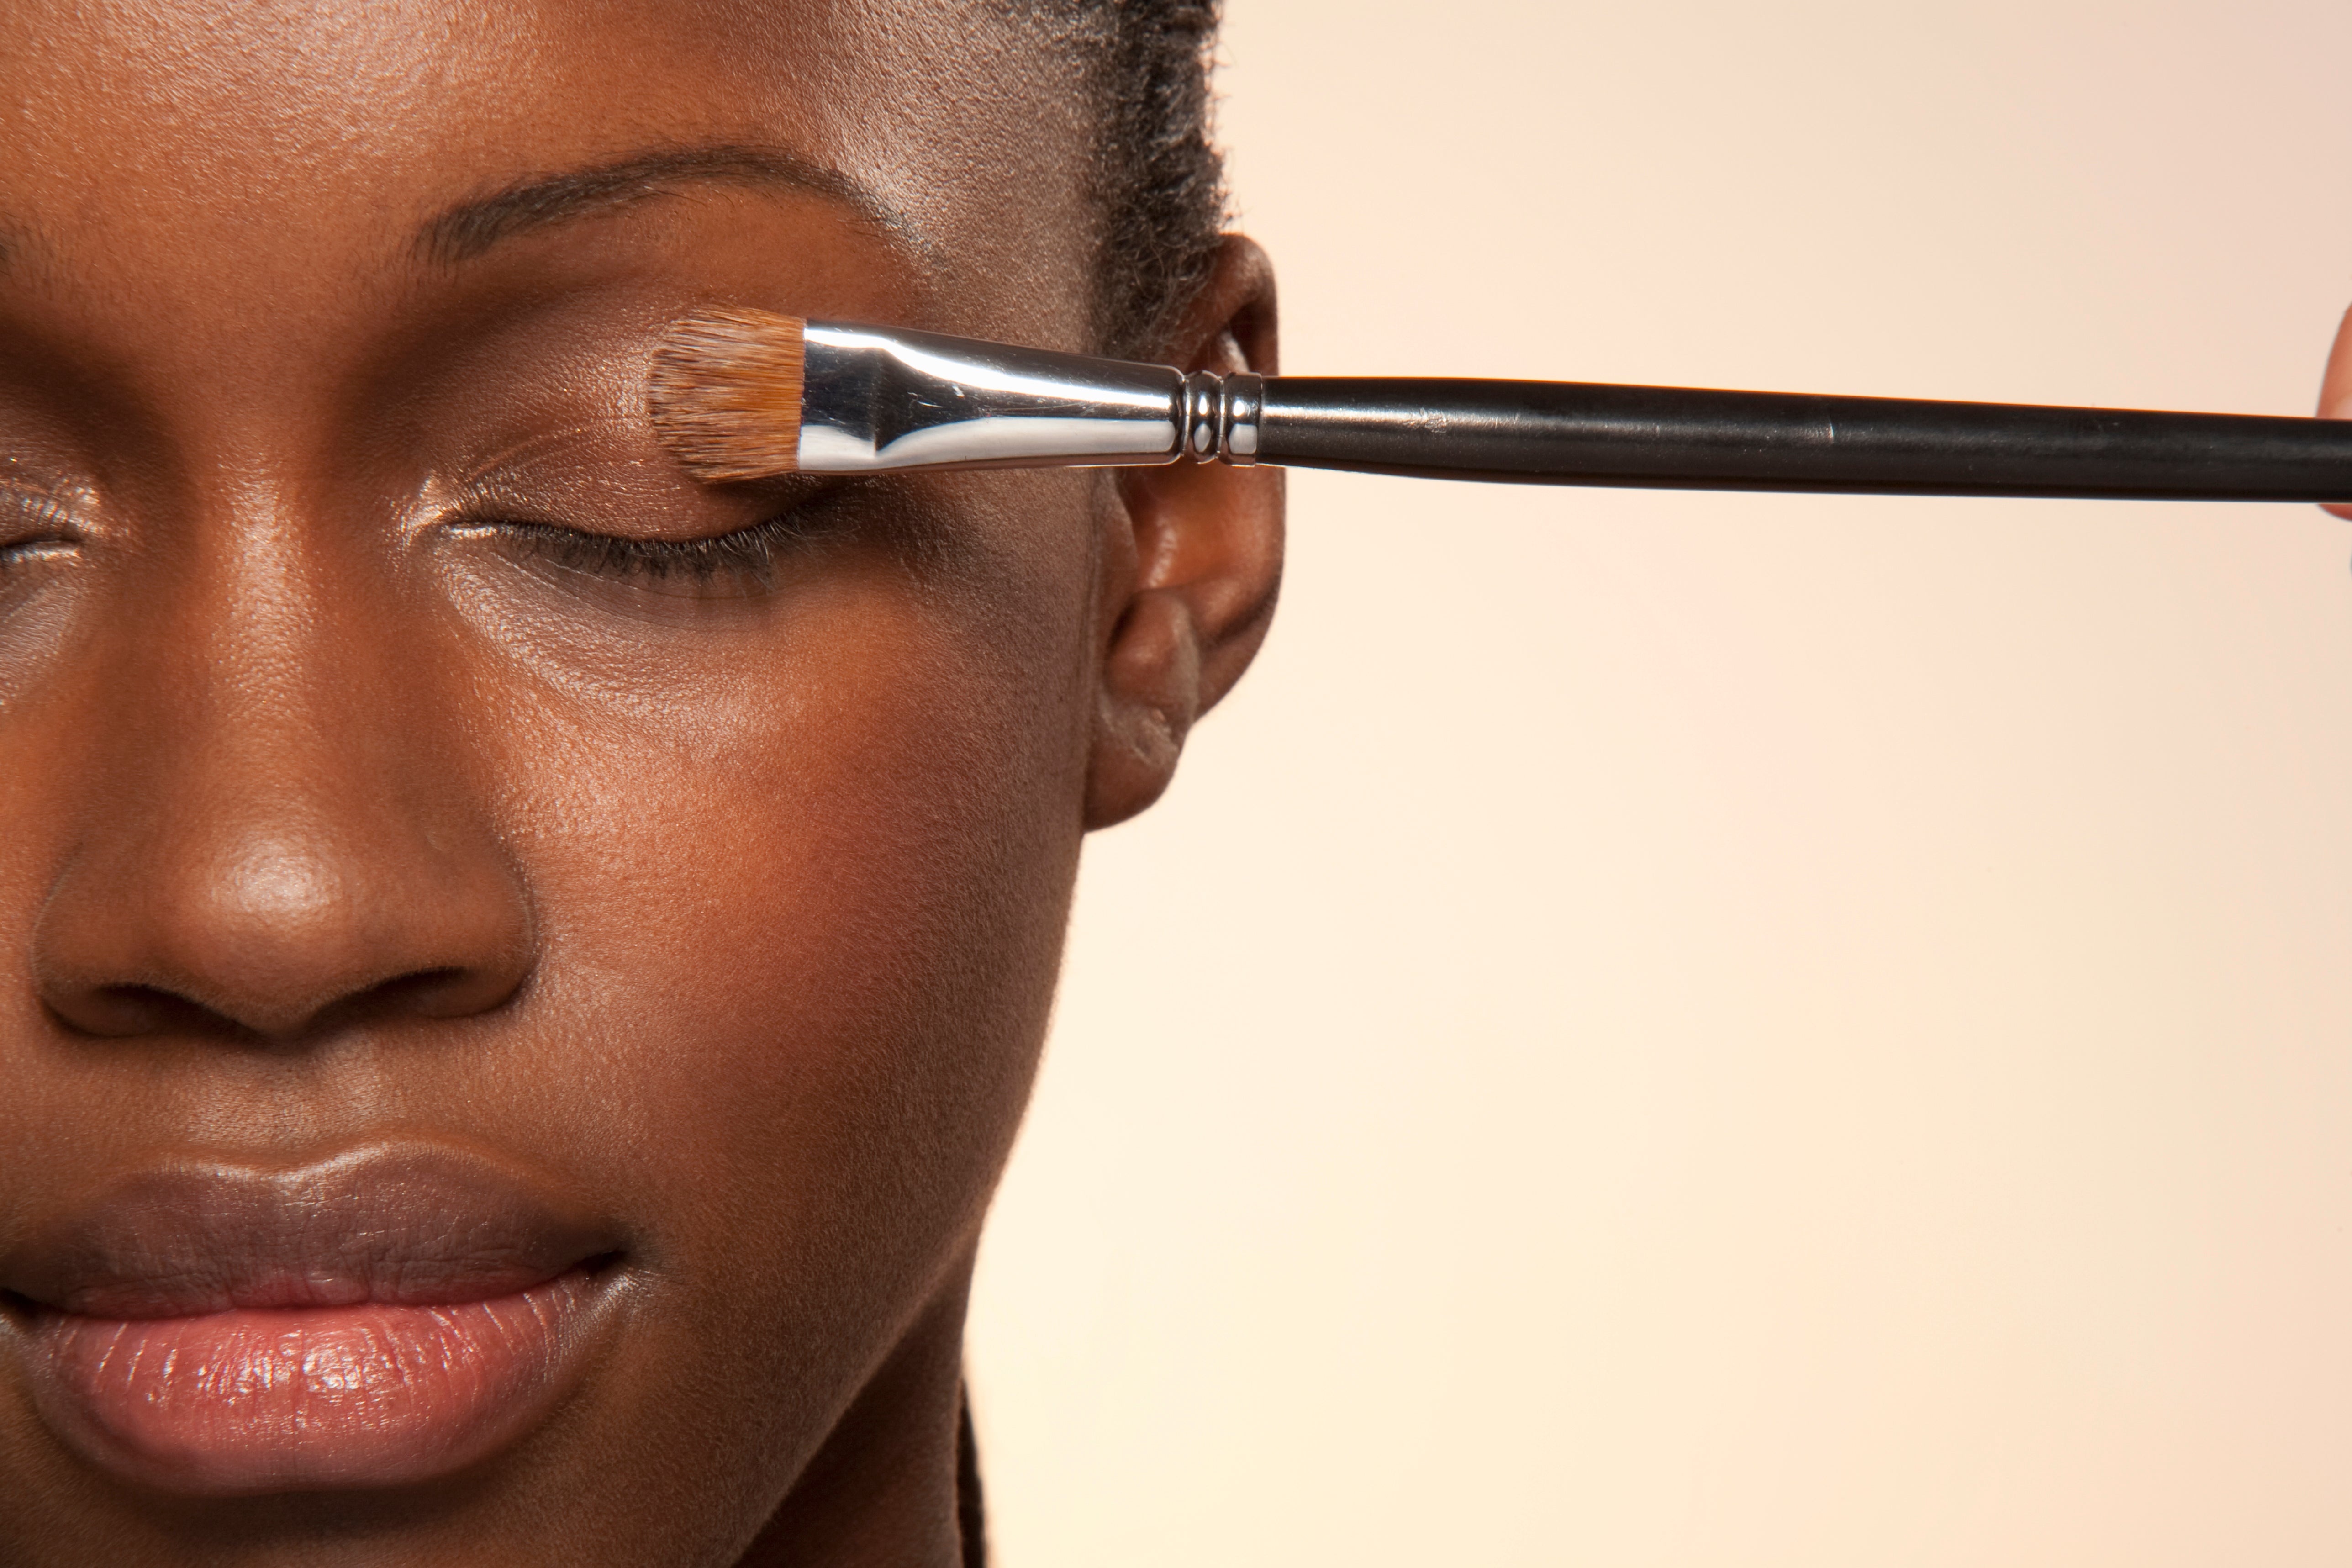 7 Things To Remember If You’re An Aspiring Makeup Artist